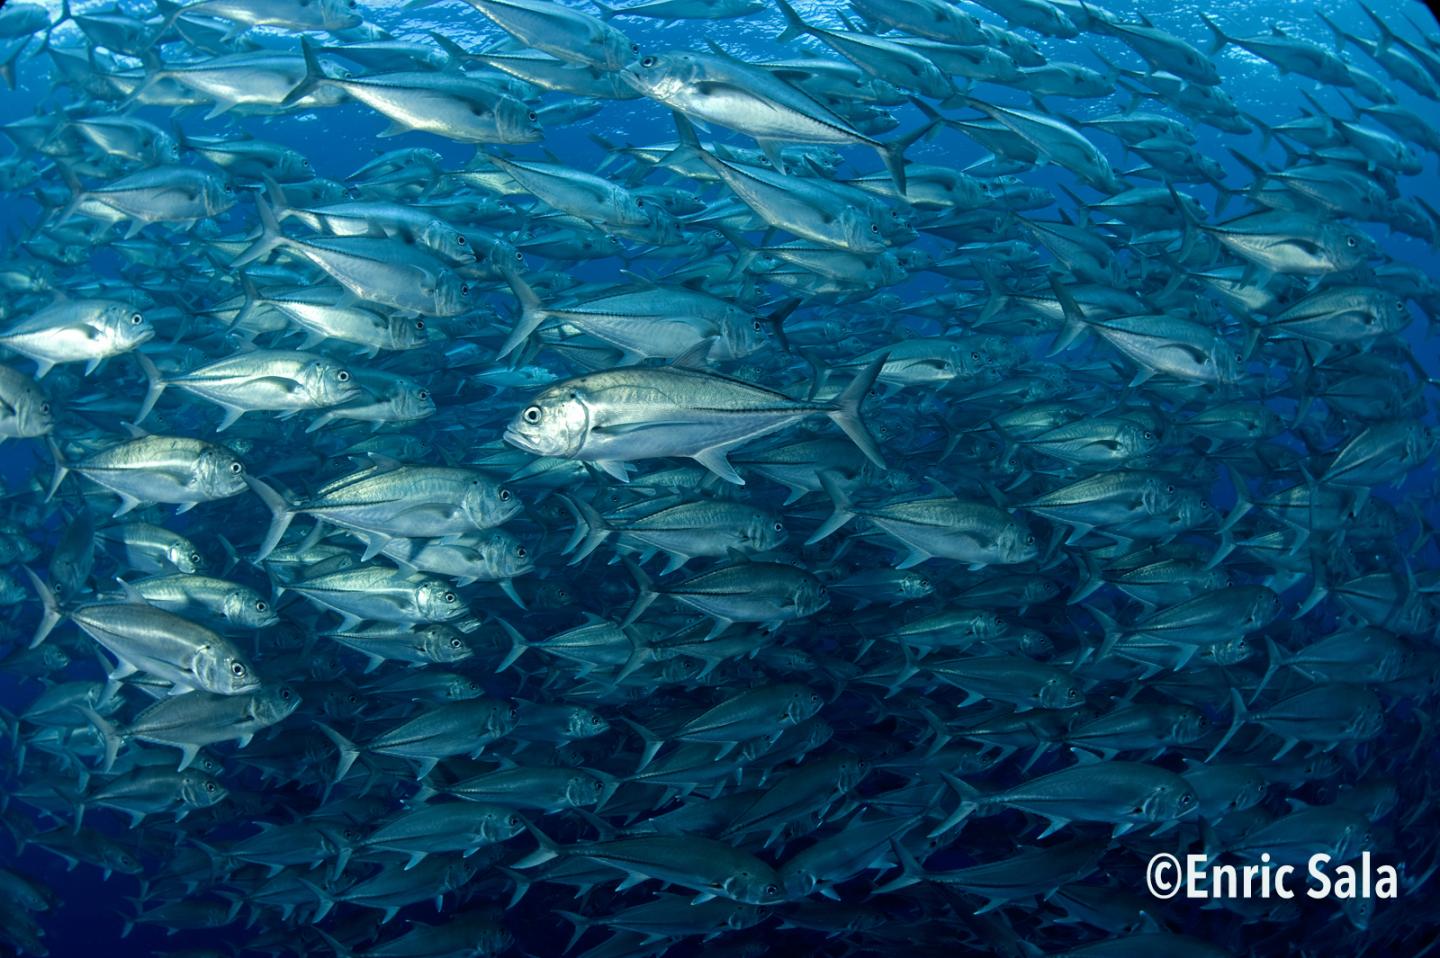 Leaving more big fish in the sea reduces CO2 emissions